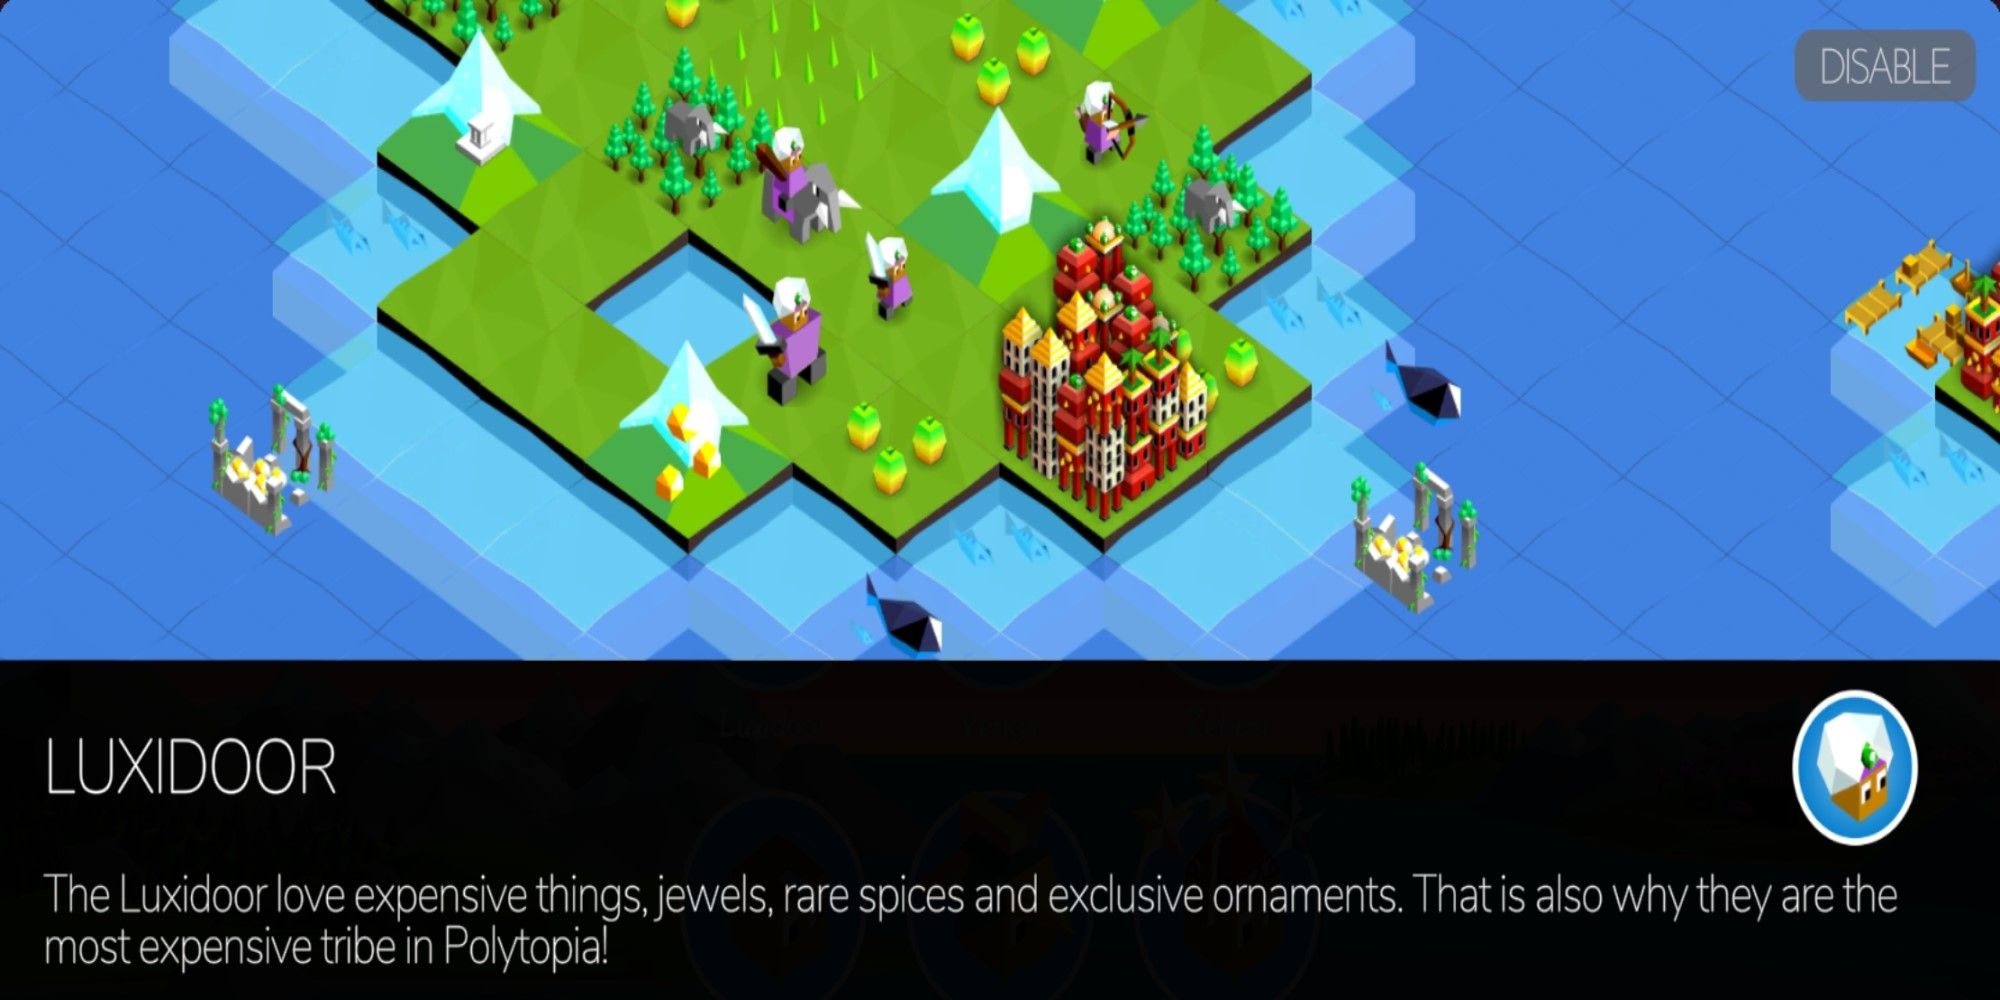 Information on the Luxidoor Tribe from Battle of Polytopia.